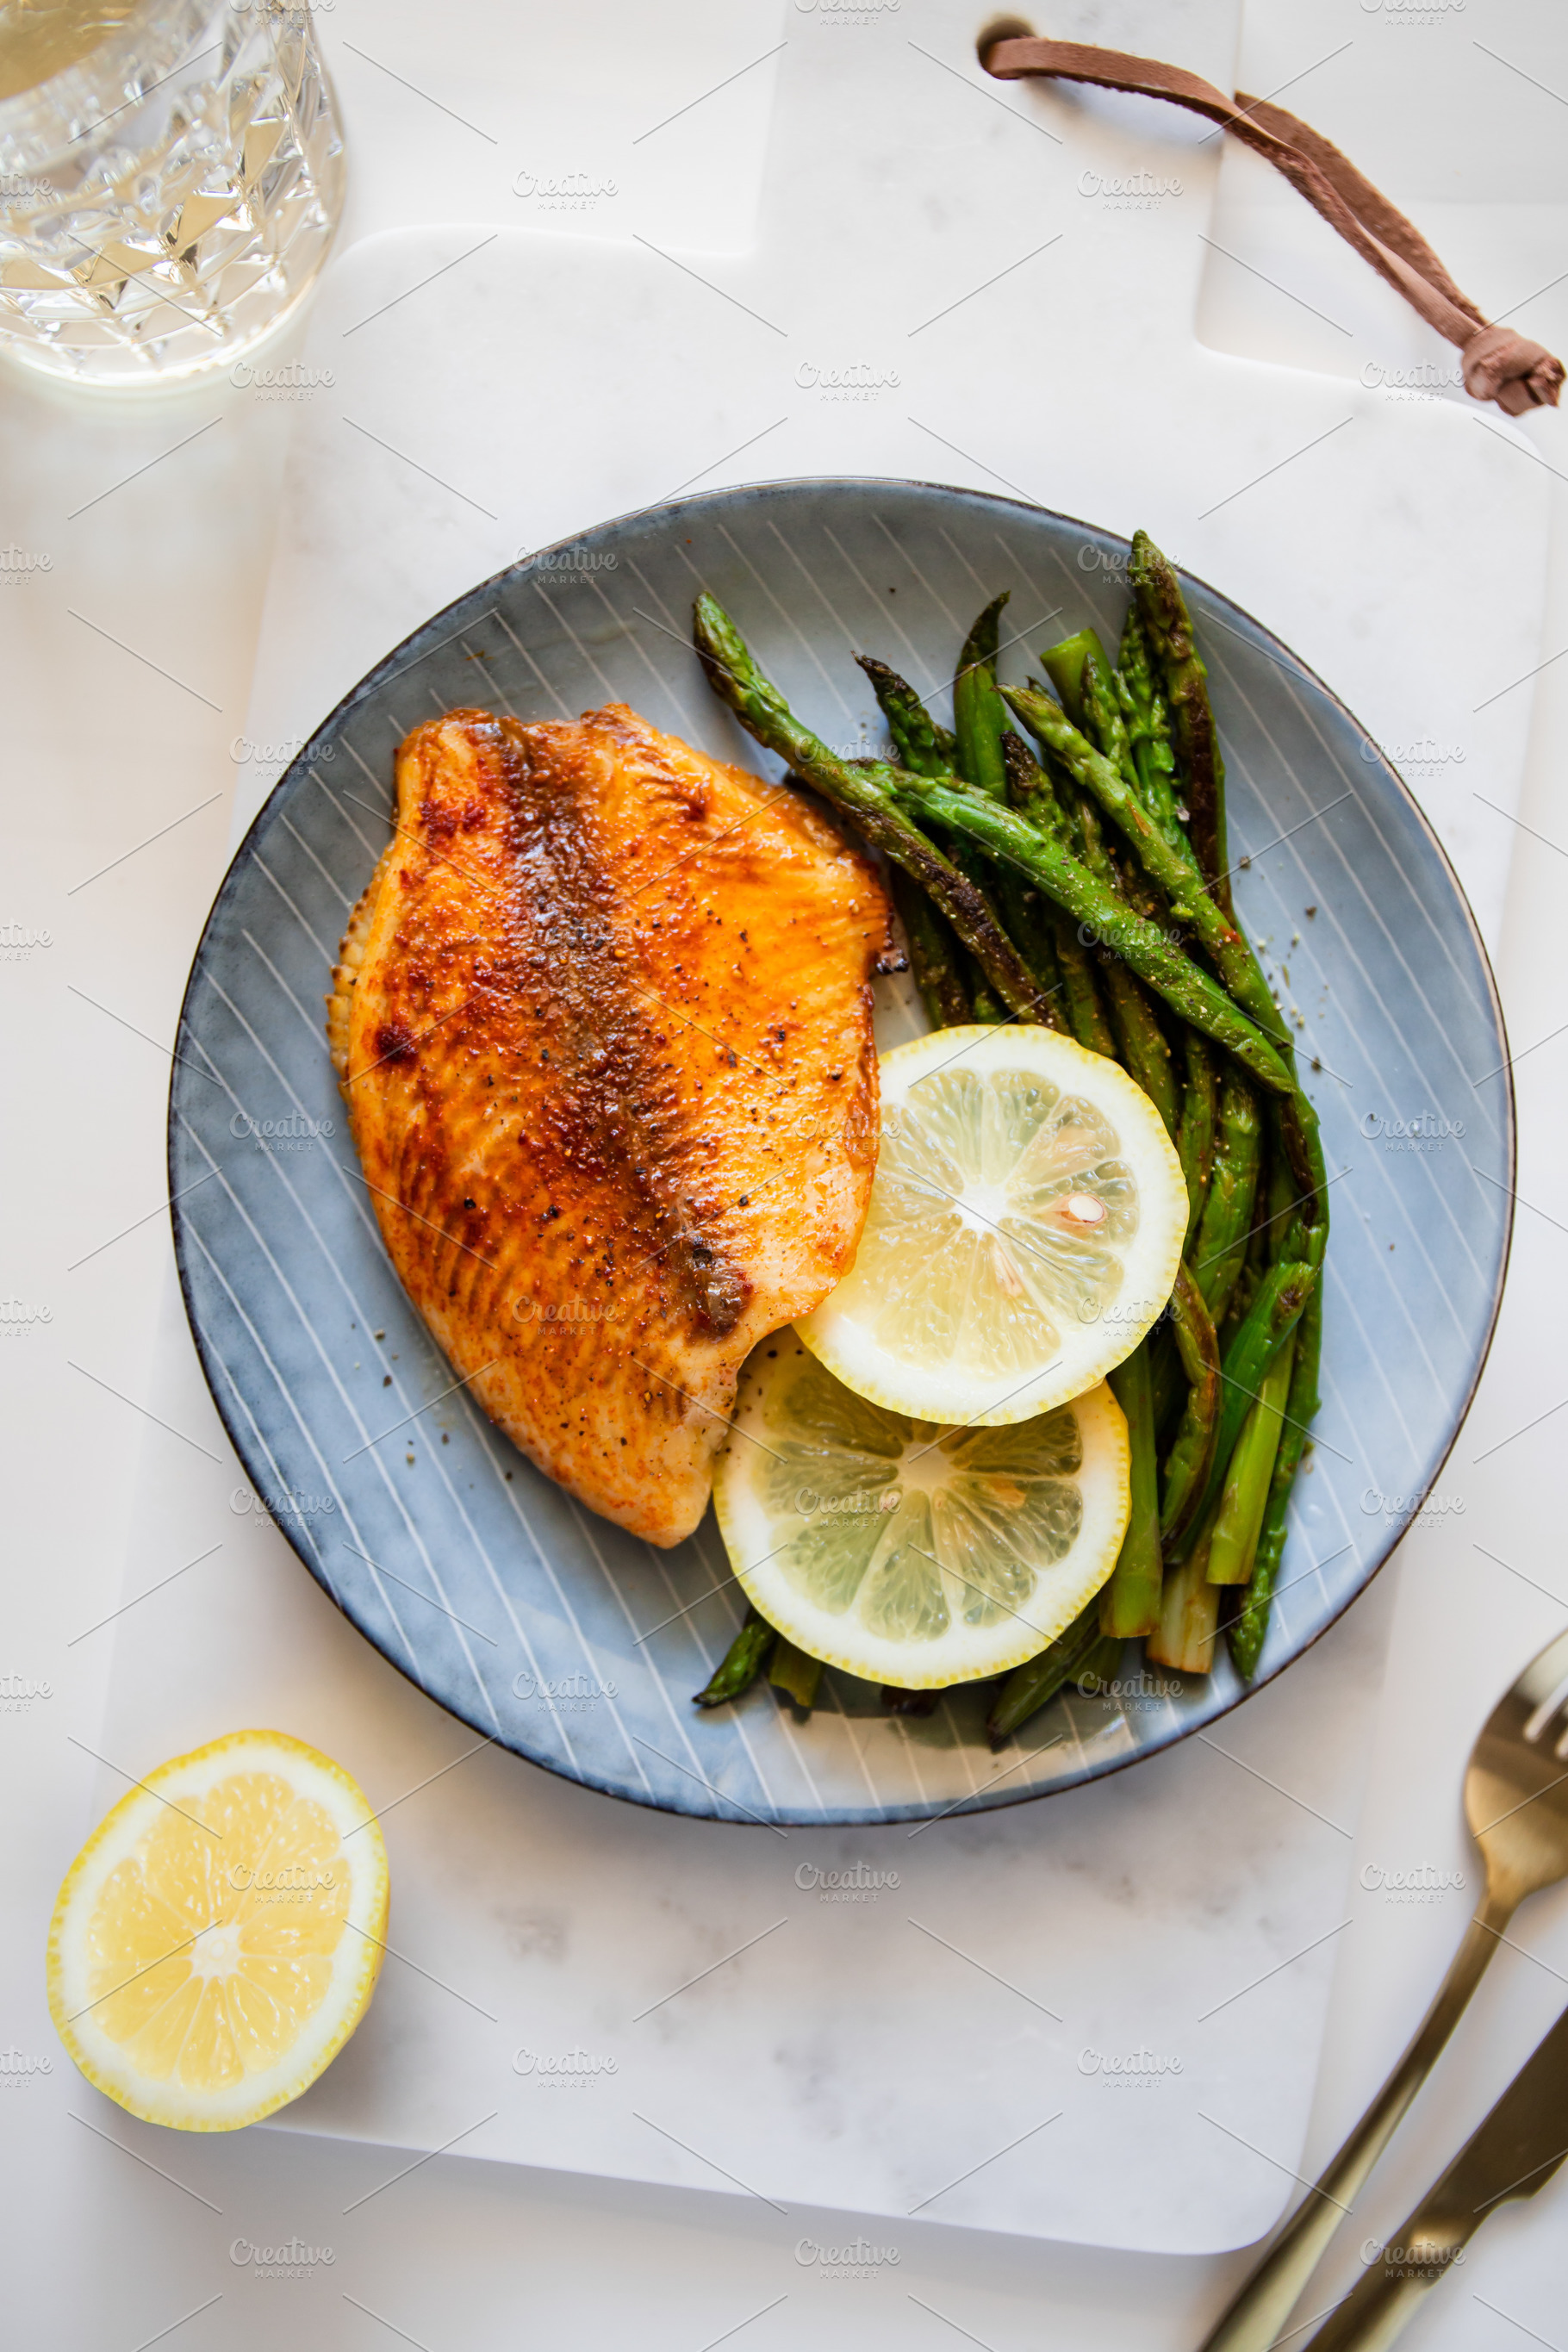 Roasted tilapia with asparagus | High-Quality Food Images ~ Creative Market